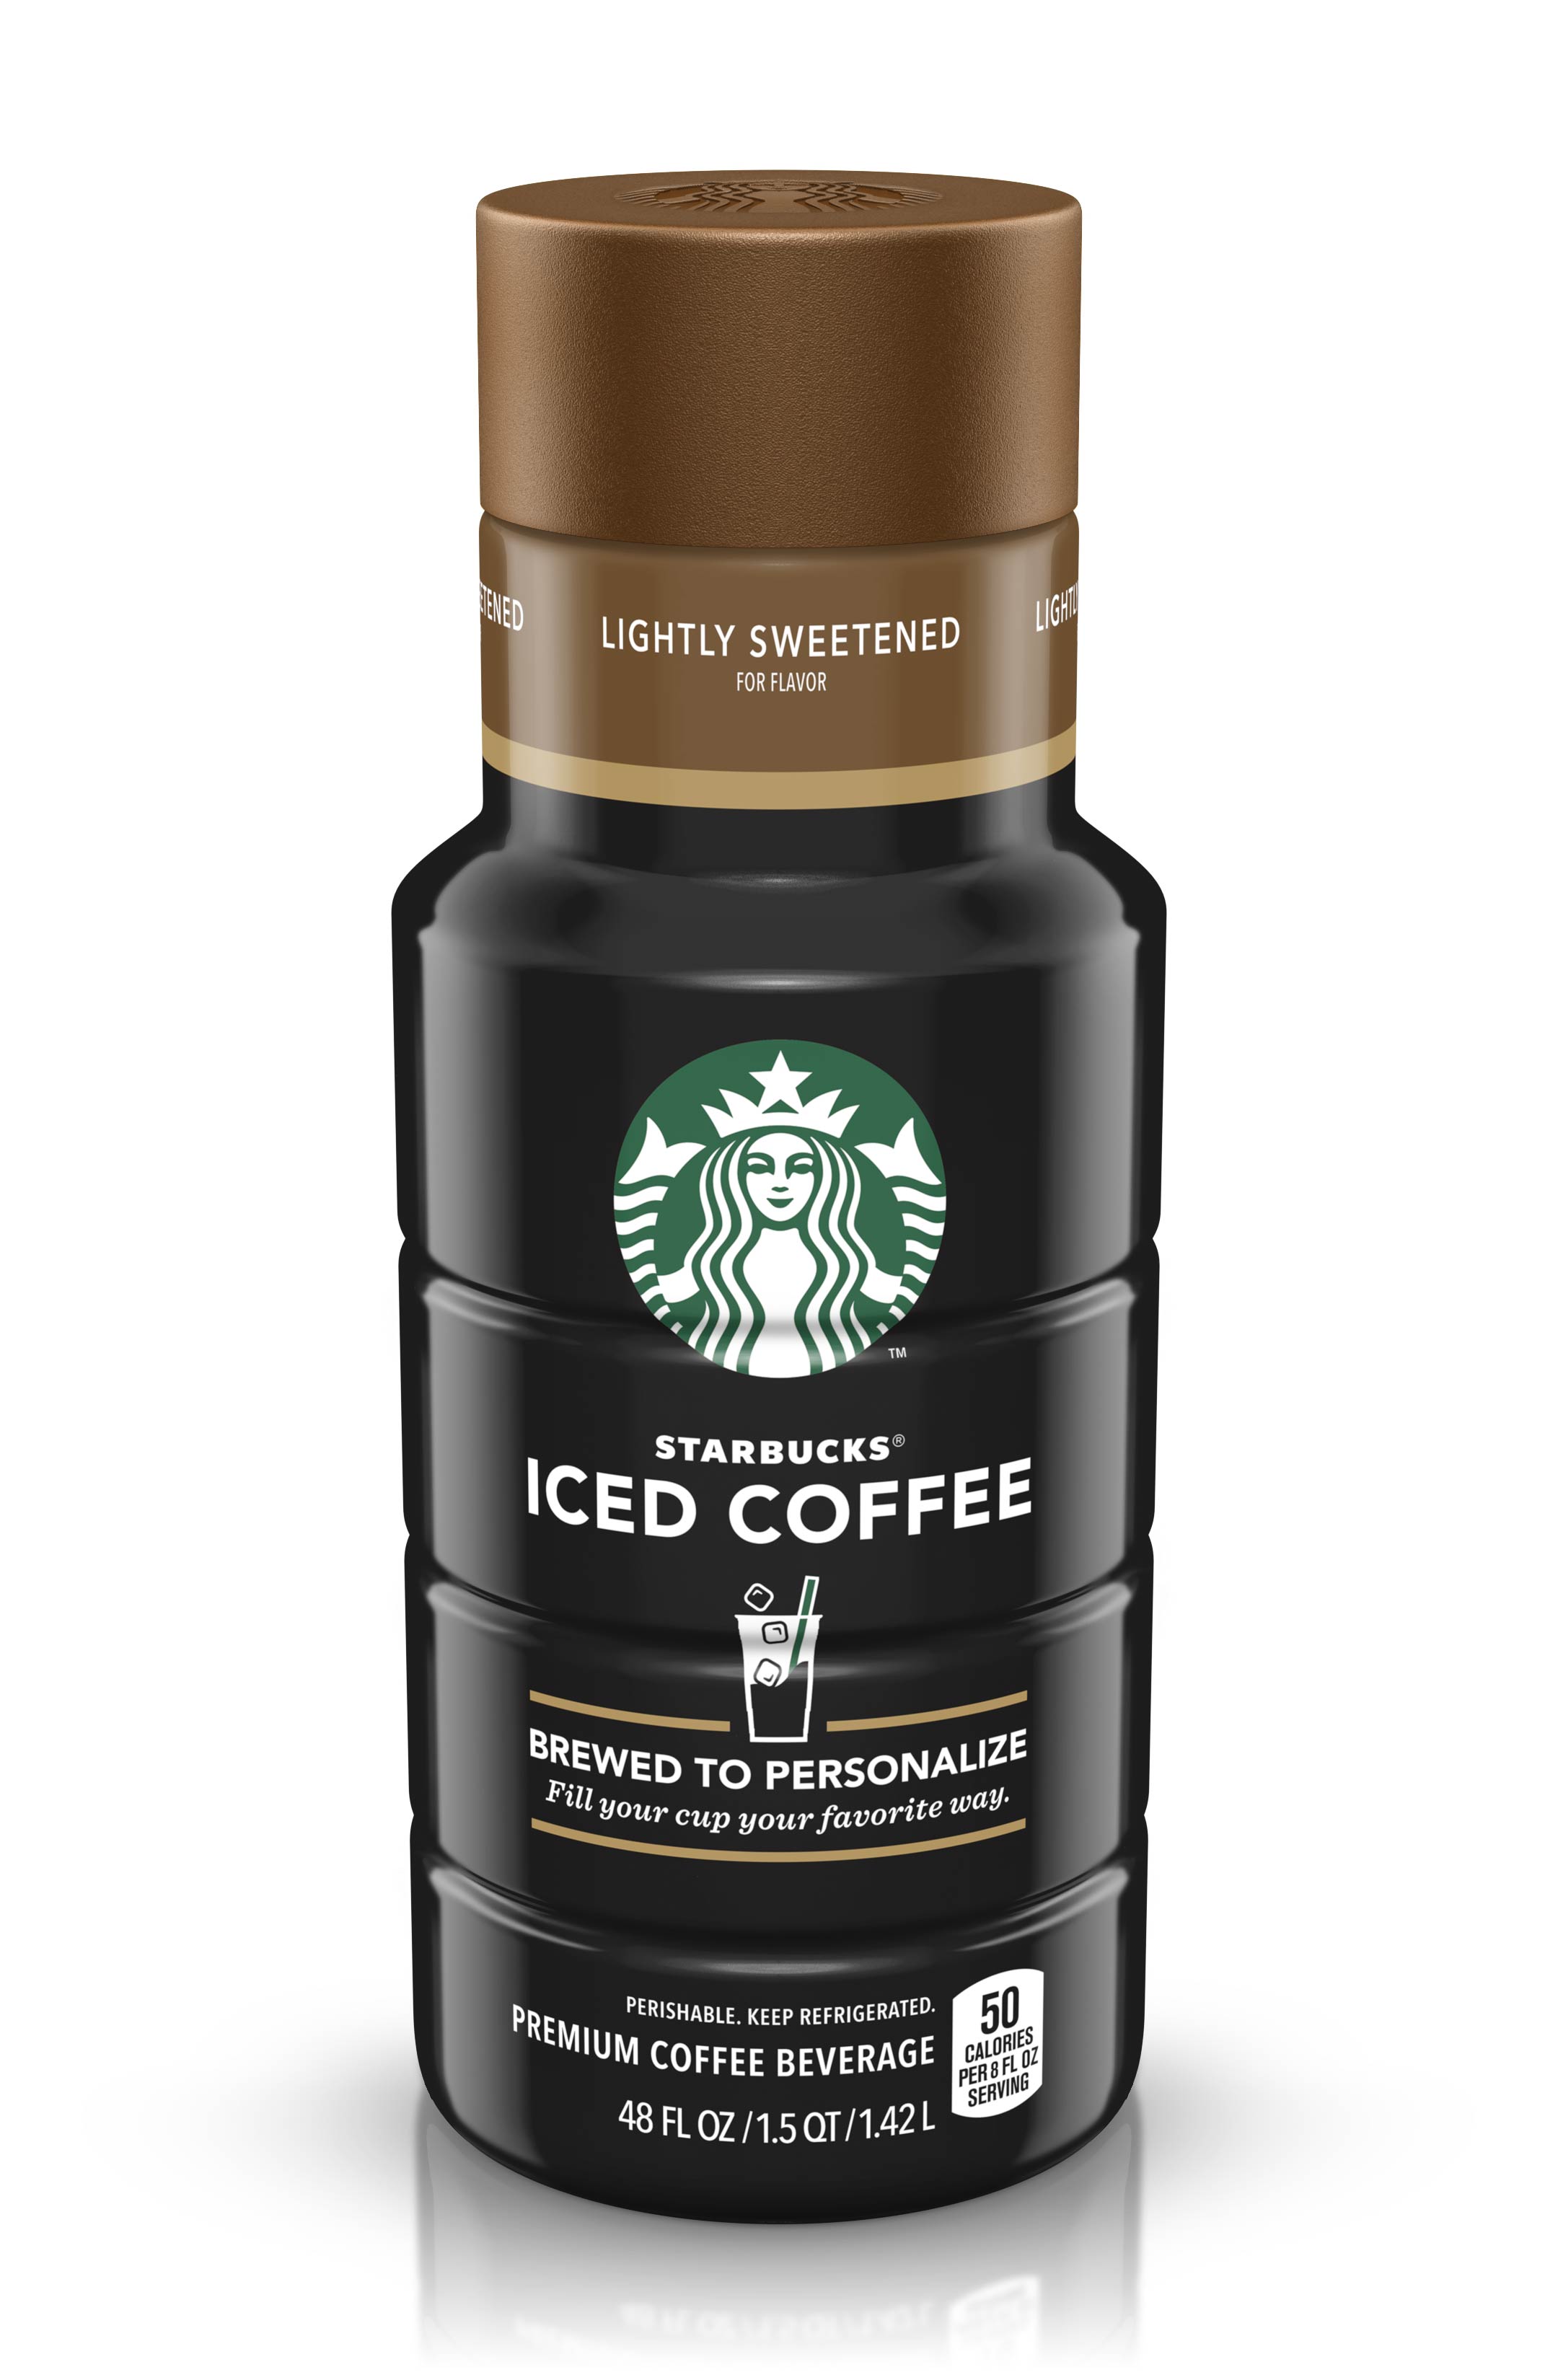 New Starbucks Iced Coffee Brewed to Personalize at Home